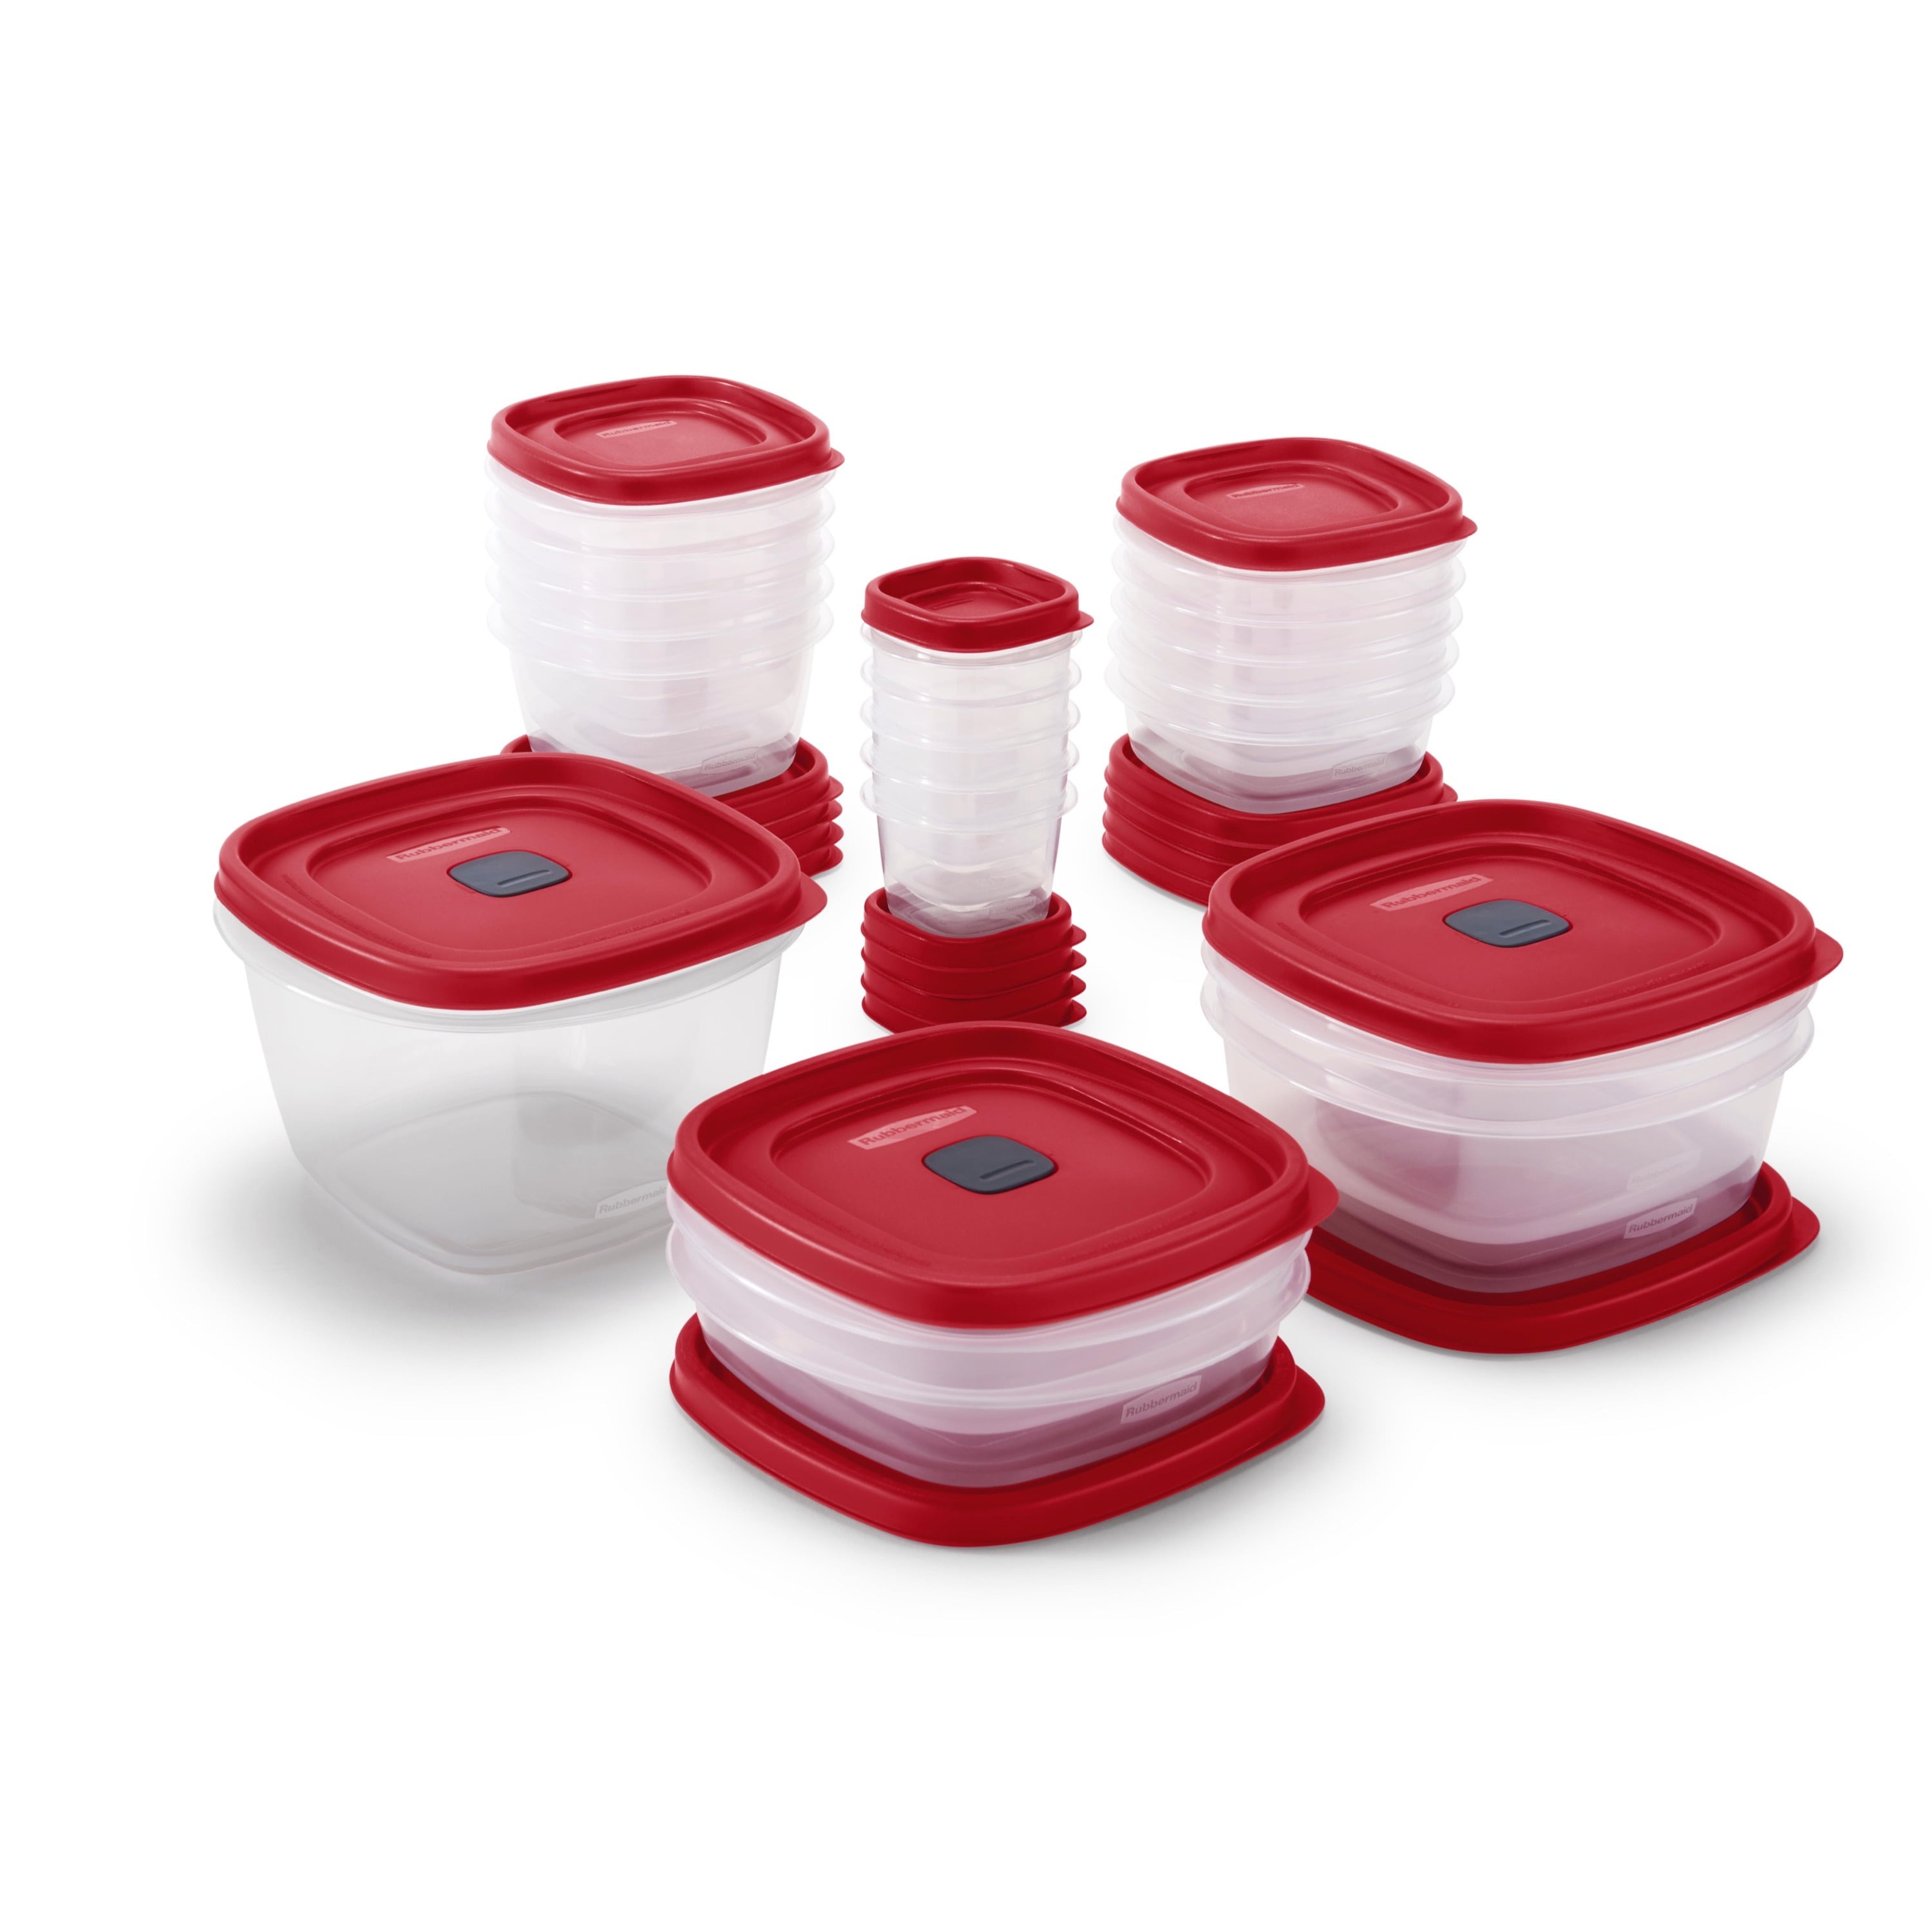 Rubbermaid 42-Piece Food Storage Containers with Lids, Salad Dressing and  Condiment Containers, and Steam Vents, Microwave and Dishwasher Safe, Red